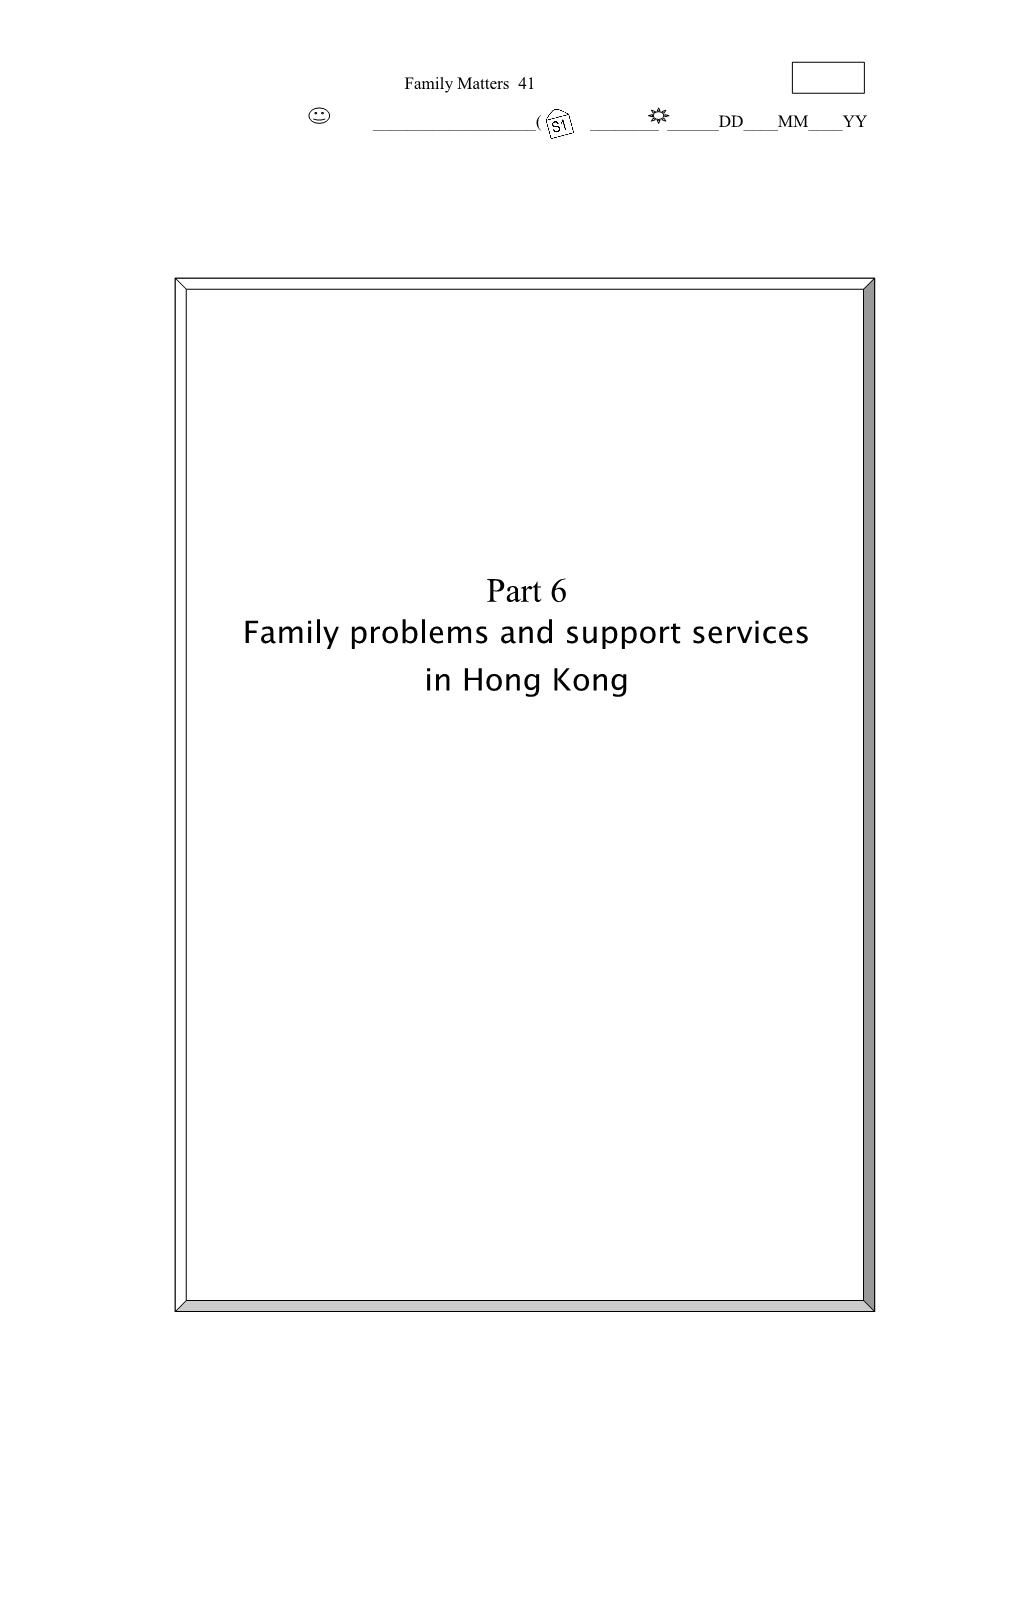 Family Problems and Support Services in Hong Kong